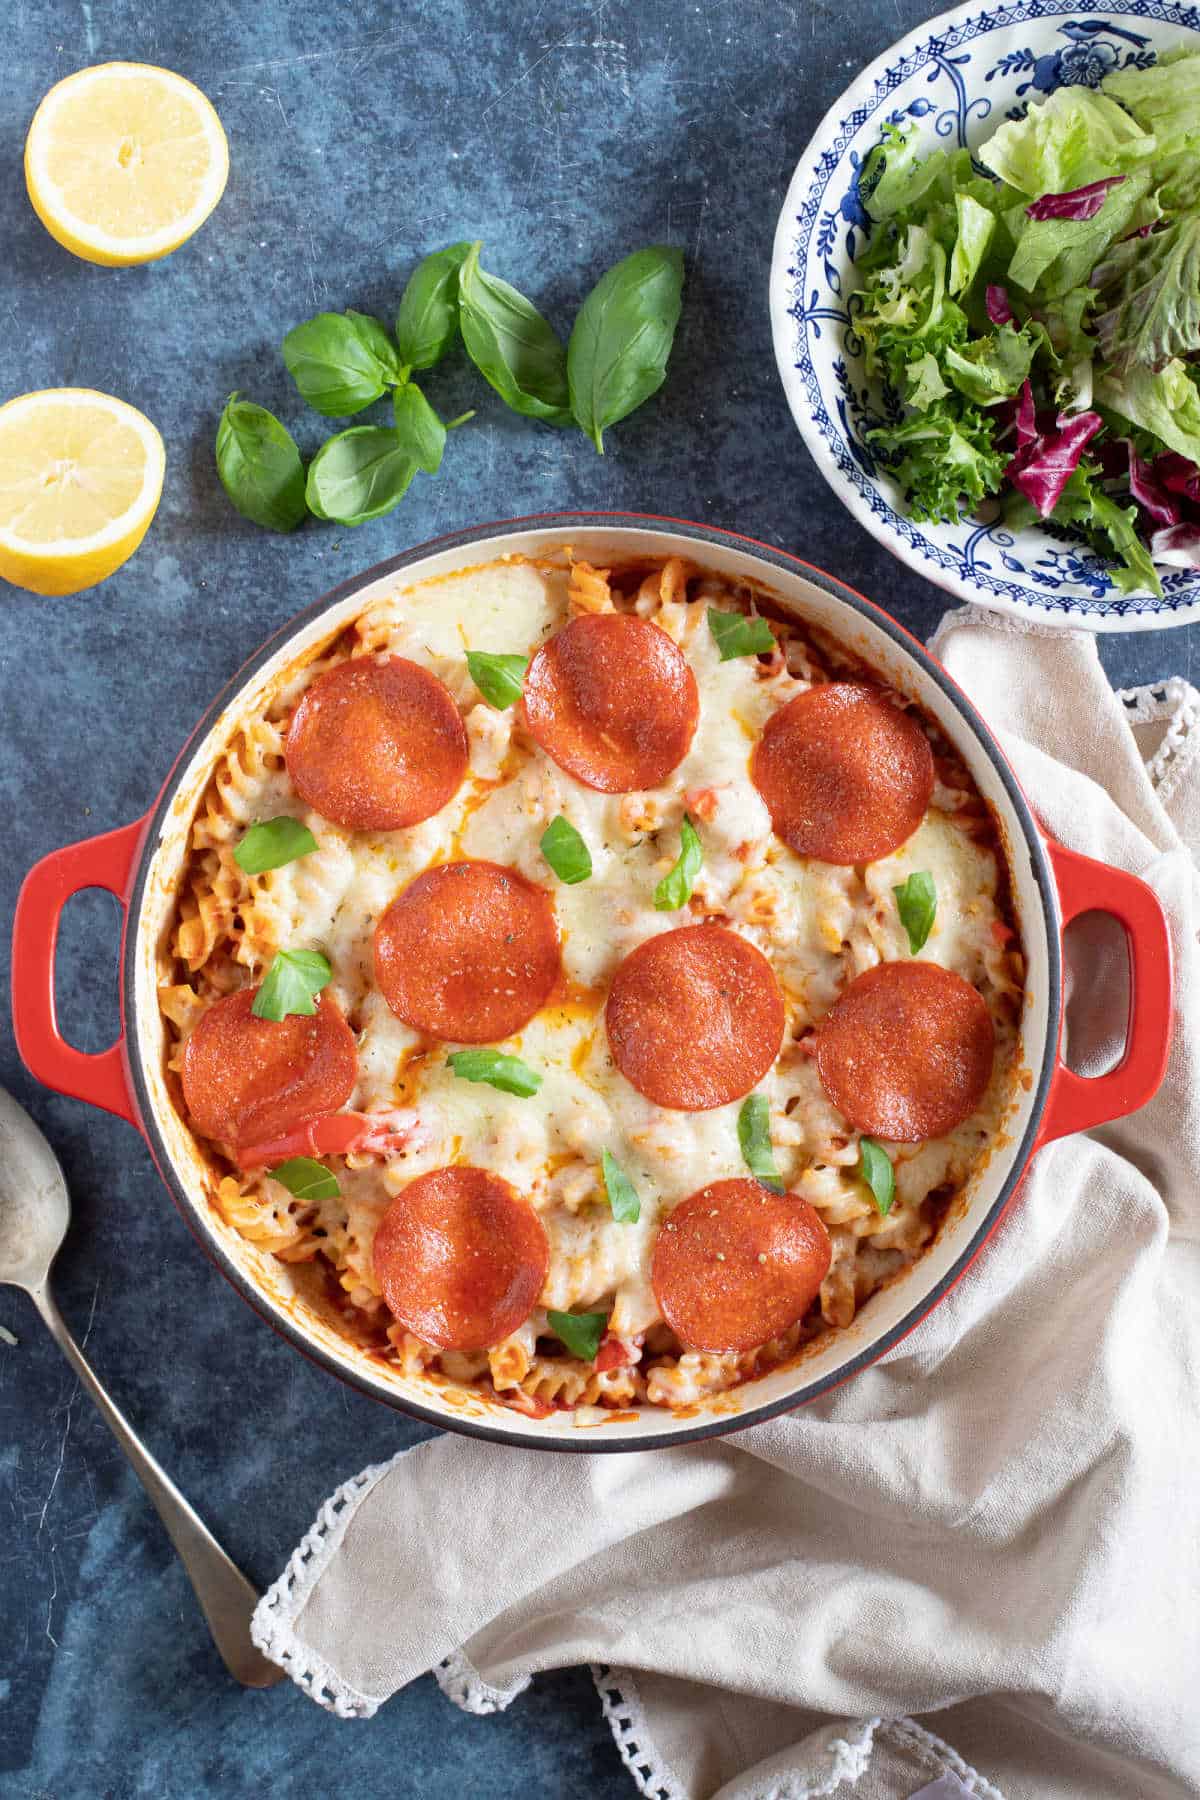 Pizza pasta bake with a green salad.